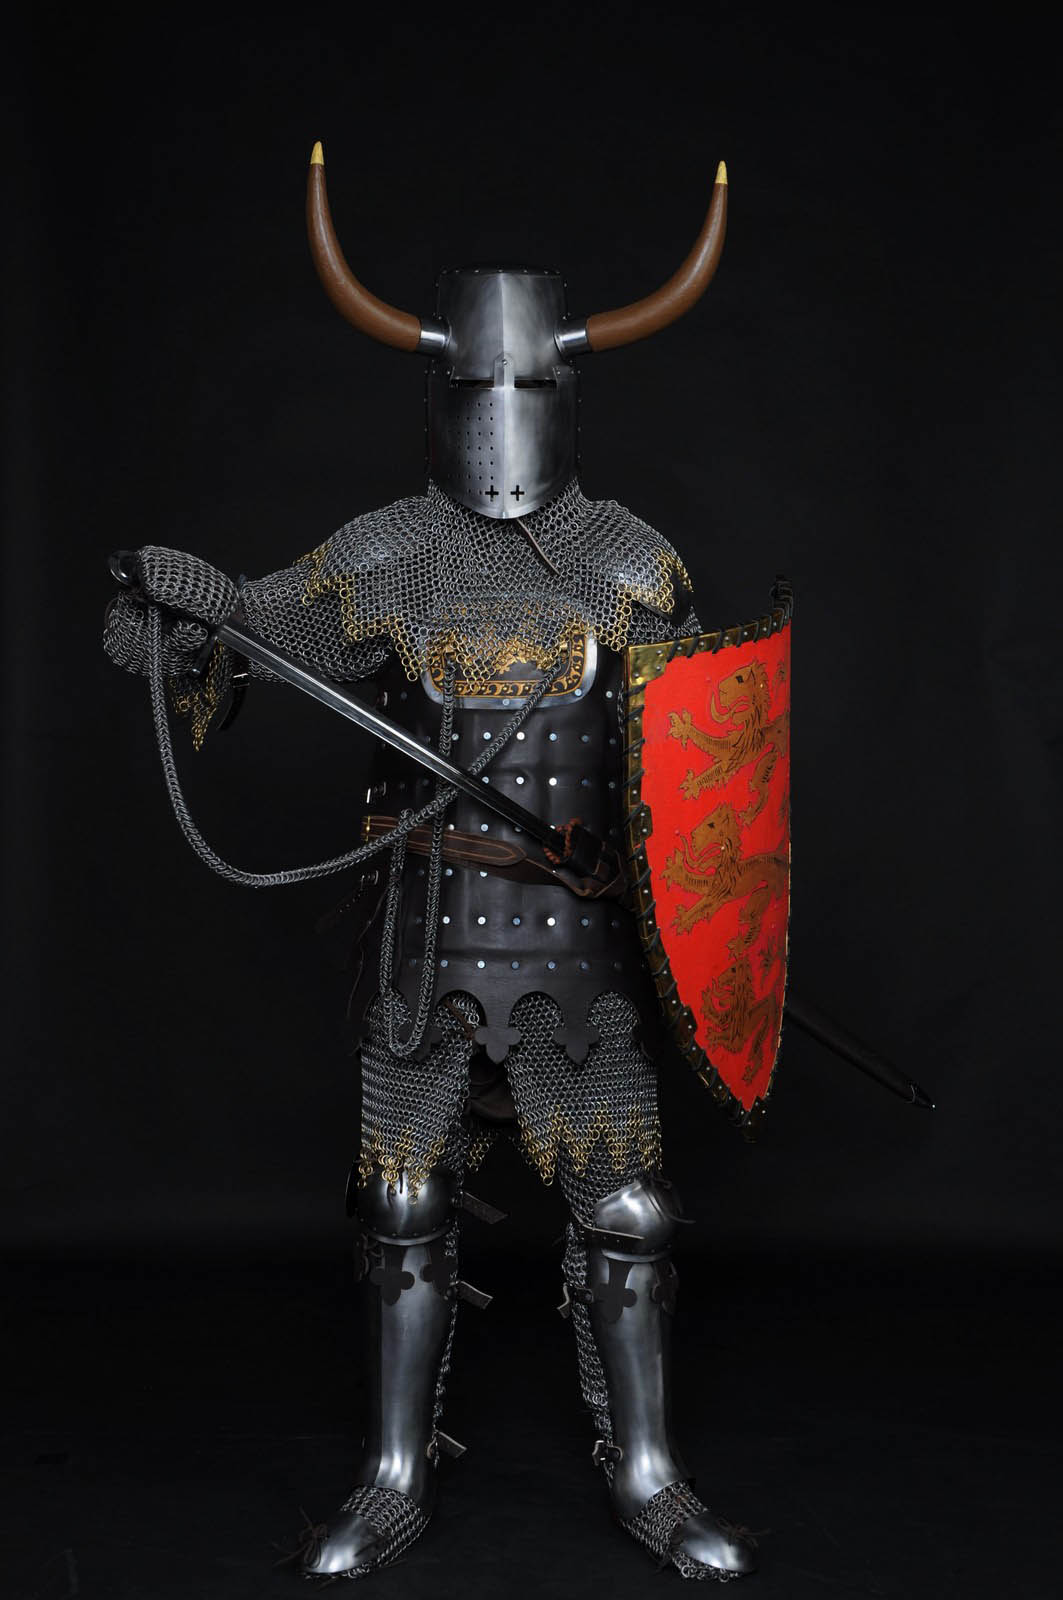 Medieval full armor of the XIII century - perfect battle mix!